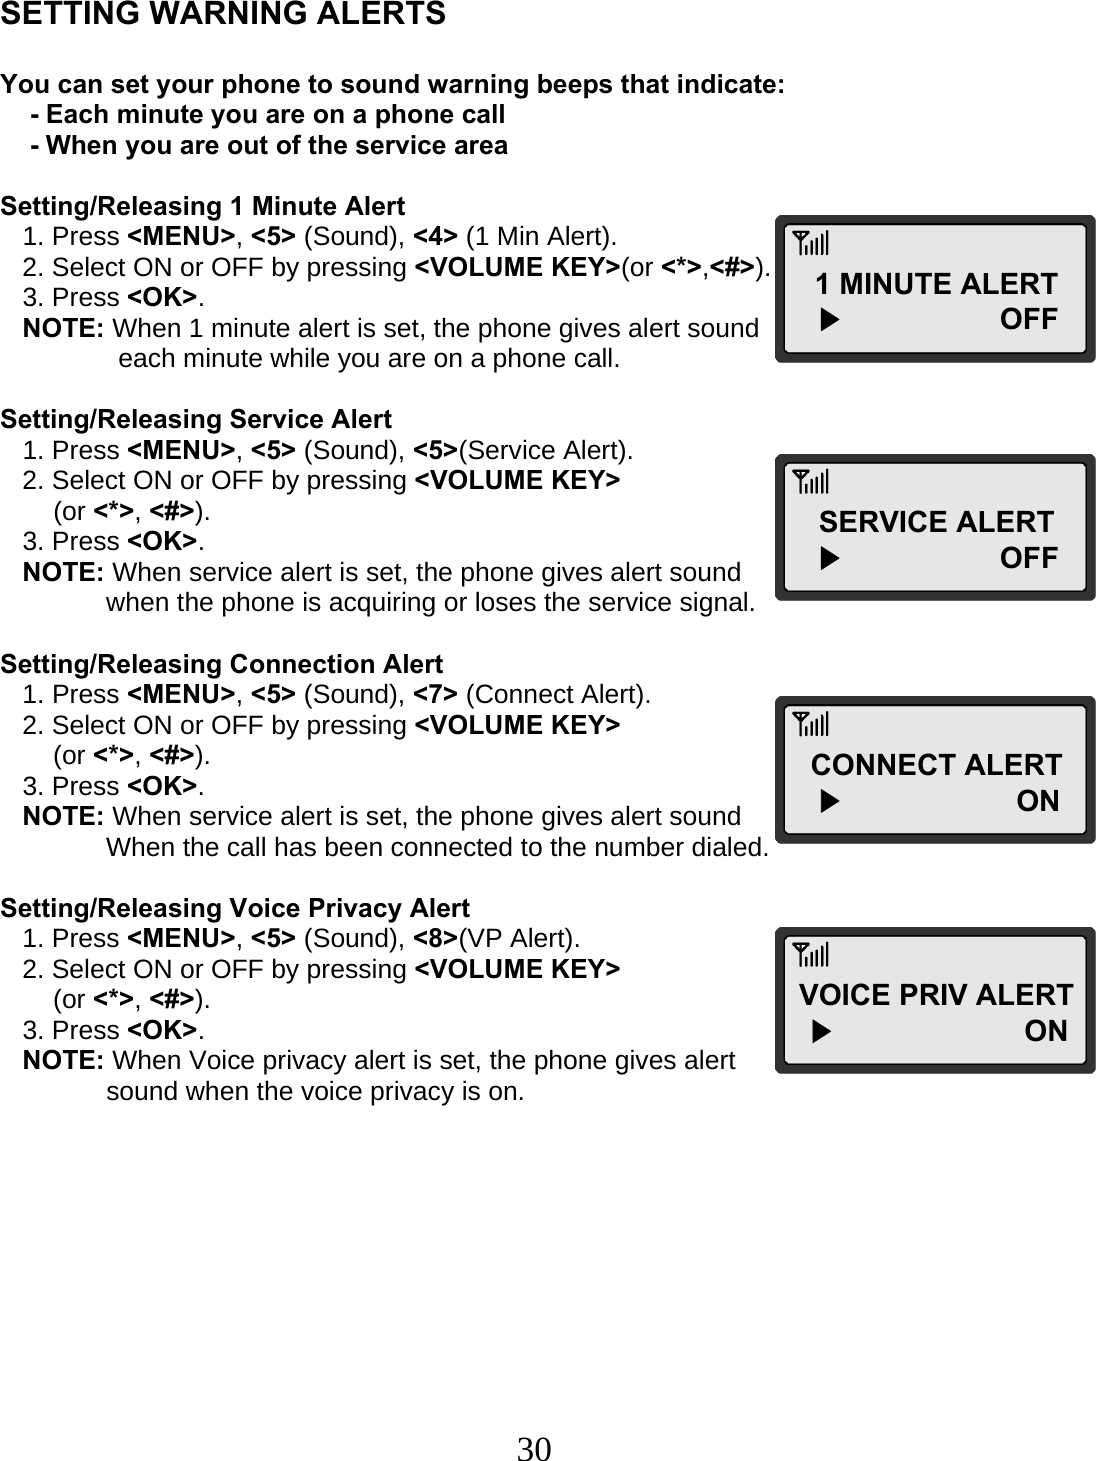  30   SETTING WARNING ALERTS  You can set your phone to sound warning beeps that indicate:     - Each minute you are on a phone call     - When you are out of the service area  Setting/Releasing 1 Minute Alert    1. Press &lt;MENU&gt;, &lt;5&gt; (Sound), &lt;4&gt; (1 Min Alert).    2. Select ON or OFF by pressing &lt;VOLUME KEY&gt;(or &lt;*&gt;,&lt;#&gt;).    3. Press &lt;OK&gt;.    NOTE: When 1 minute alert is set, the phone gives alert sound        each minute while you are on a phone call.  Setting/Releasing Service Alert    1. Press &lt;MENU&gt;, &lt;5&gt; (Sound), &lt;5&gt;(Service Alert).    2. Select ON or OFF by pressing &lt;VOLUME KEY&gt;  (or &lt;*&gt;, &lt;#&gt;).    3. Press &lt;OK&gt;.    NOTE: When service alert is set, the phone gives alert sound  when the phone is acquiring or loses the service signal.  Setting/Releasing Connection Alert    1. Press &lt;MENU&gt;, &lt;5&gt; (Sound), &lt;7&gt; (Connect Alert).    2. Select ON or OFF by pressing &lt;VOLUME KEY&gt;  (or &lt;*&gt;, &lt;#&gt;).    3. Press &lt;OK&gt;.    NOTE: When service alert is set, the phone gives alert sound  When the call has been connected to the number dialed.  Setting/Releasing Voice Privacy Alert    1. Press &lt;MENU&gt;, &lt;5&gt; (Sound), &lt;8&gt;(VP Alert).    2. Select ON or OFF by pressing &lt;VOLUME KEY&gt;   (or &lt;*&gt;, &lt;#&gt;).    3. Press &lt;OK&gt;.    NOTE: When Voice privacy alert is set, the phone gives alert  sound when the voice privacy is on.         1 MINUTE ALERT   ▶                   OFF SERVICE ALERT   ▶                   OFF CONNECT ALERT   ▶                     ON VOICE PRIV ALERT ▶                       ON  